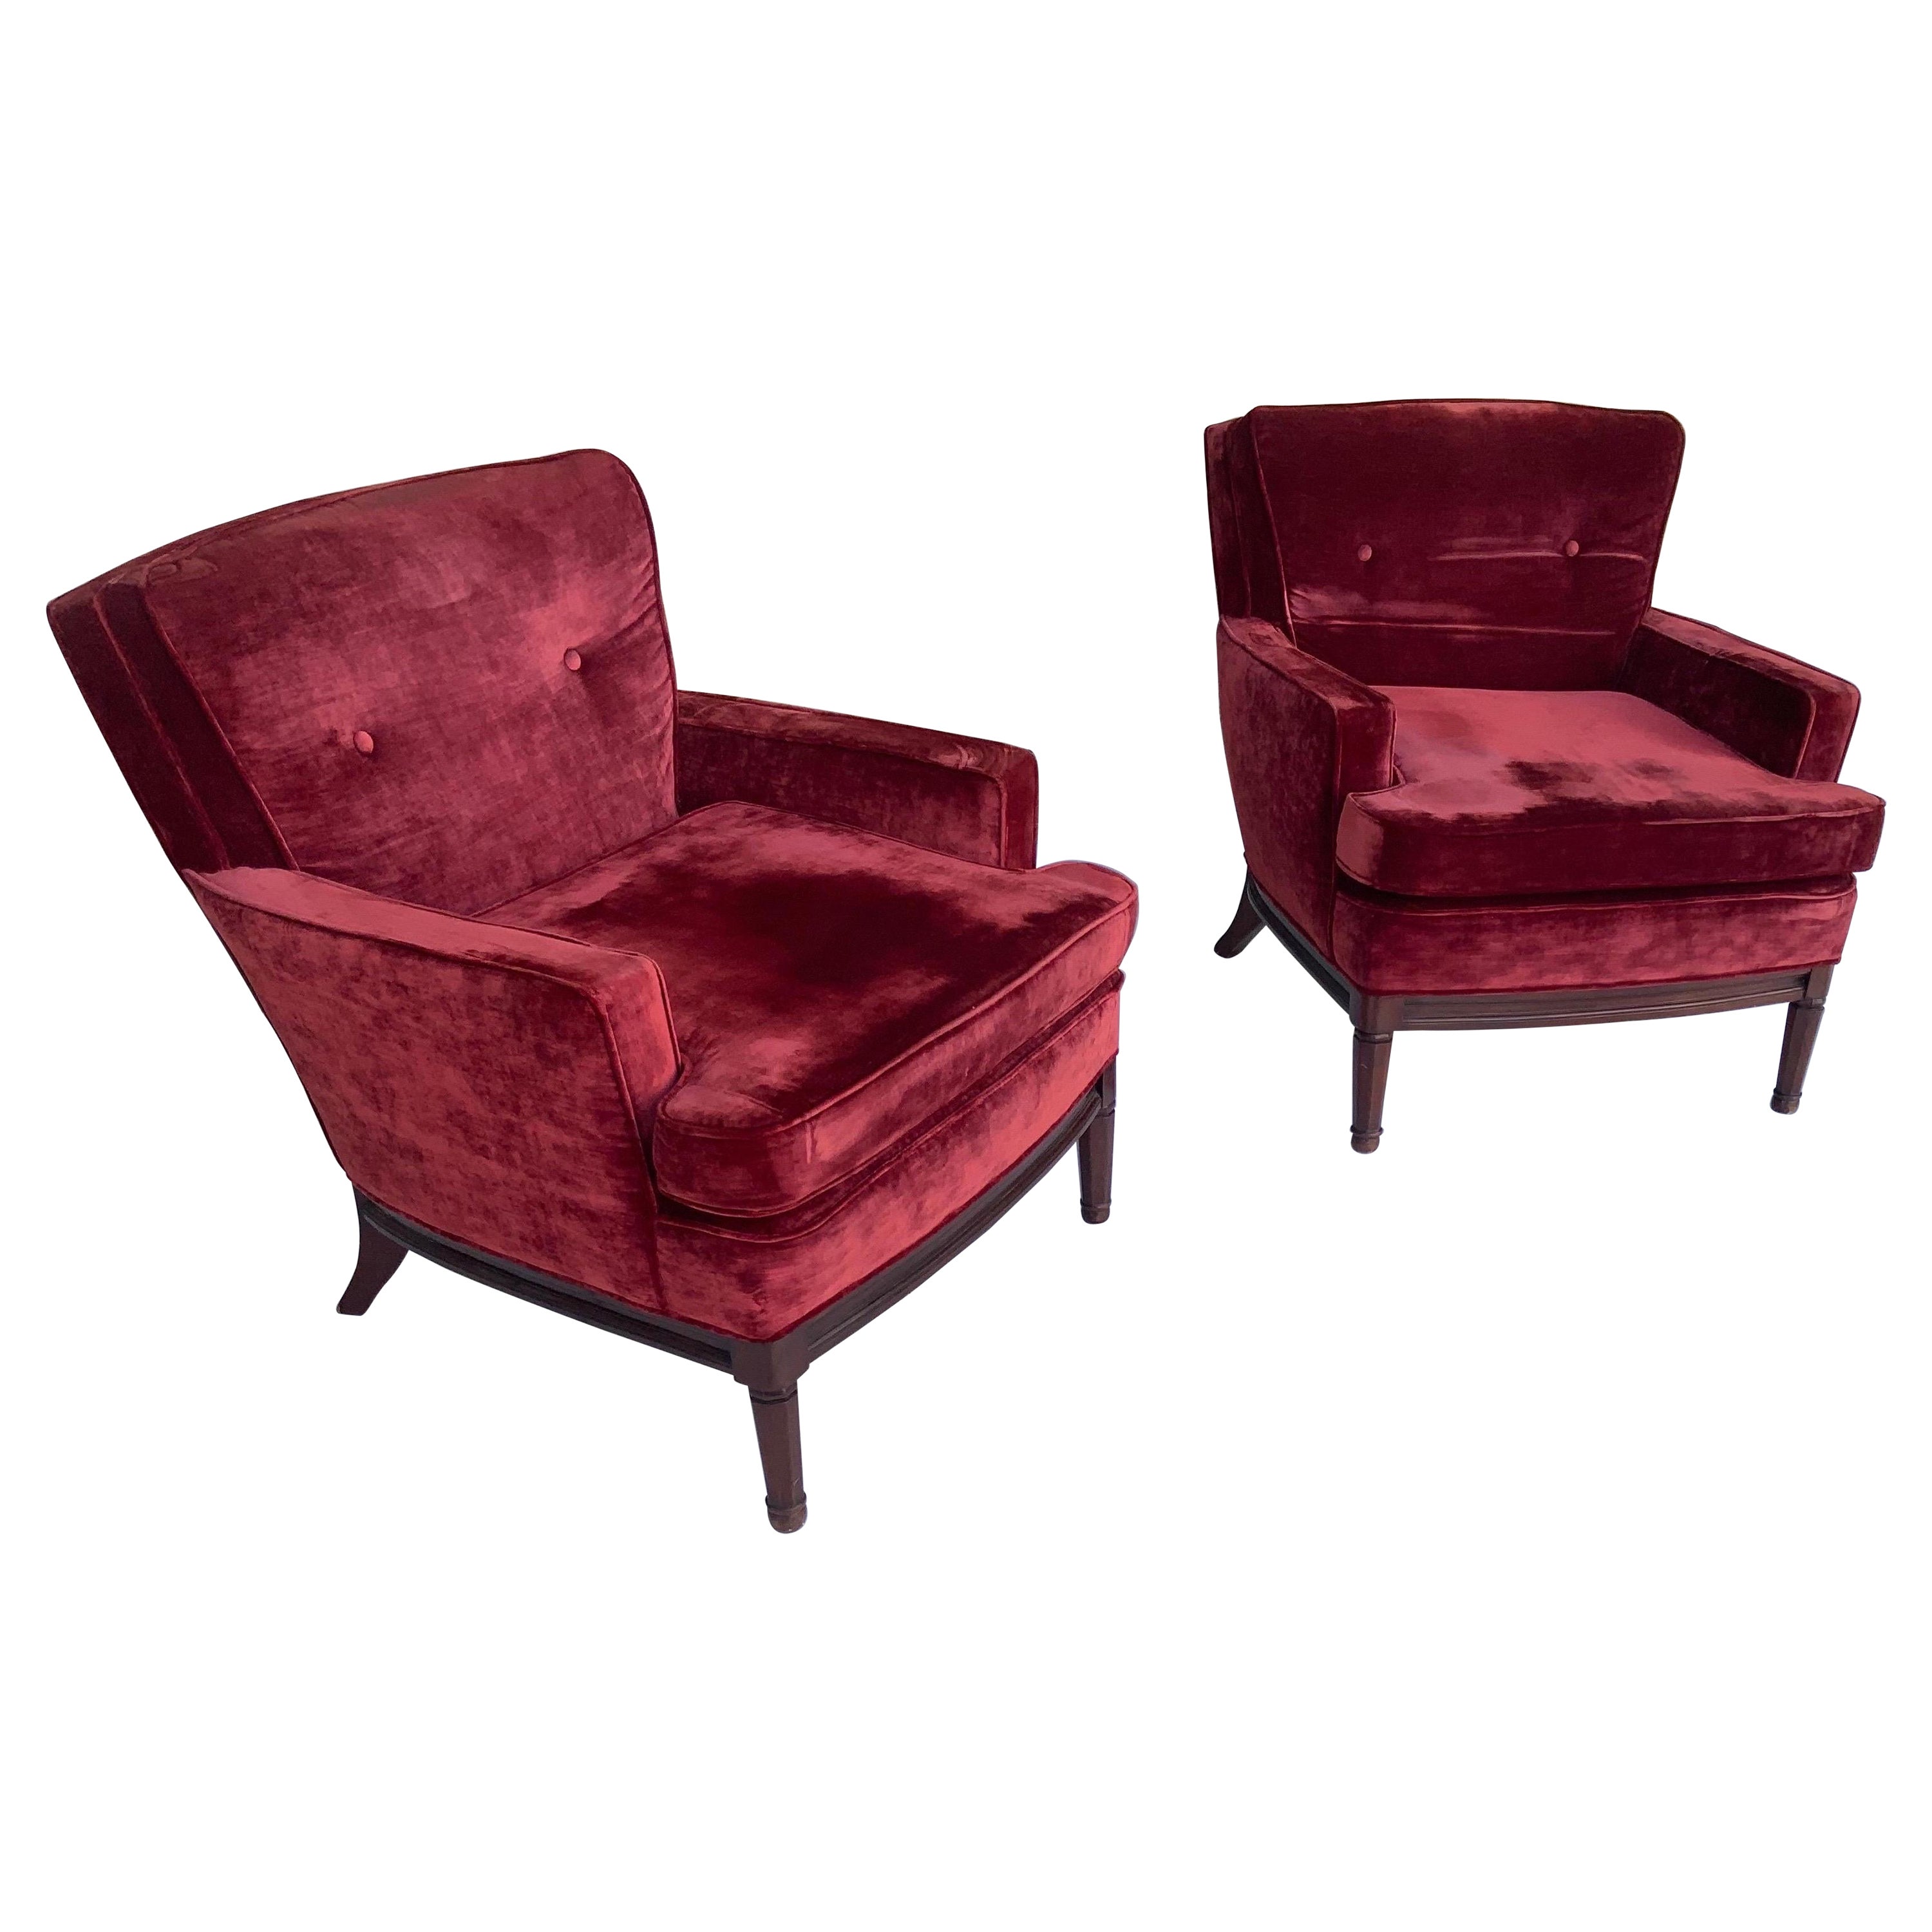 Pair of Neoclassical Maison Jansen Lounge Chairs circa 1960, 2 Pairs Available For Sale